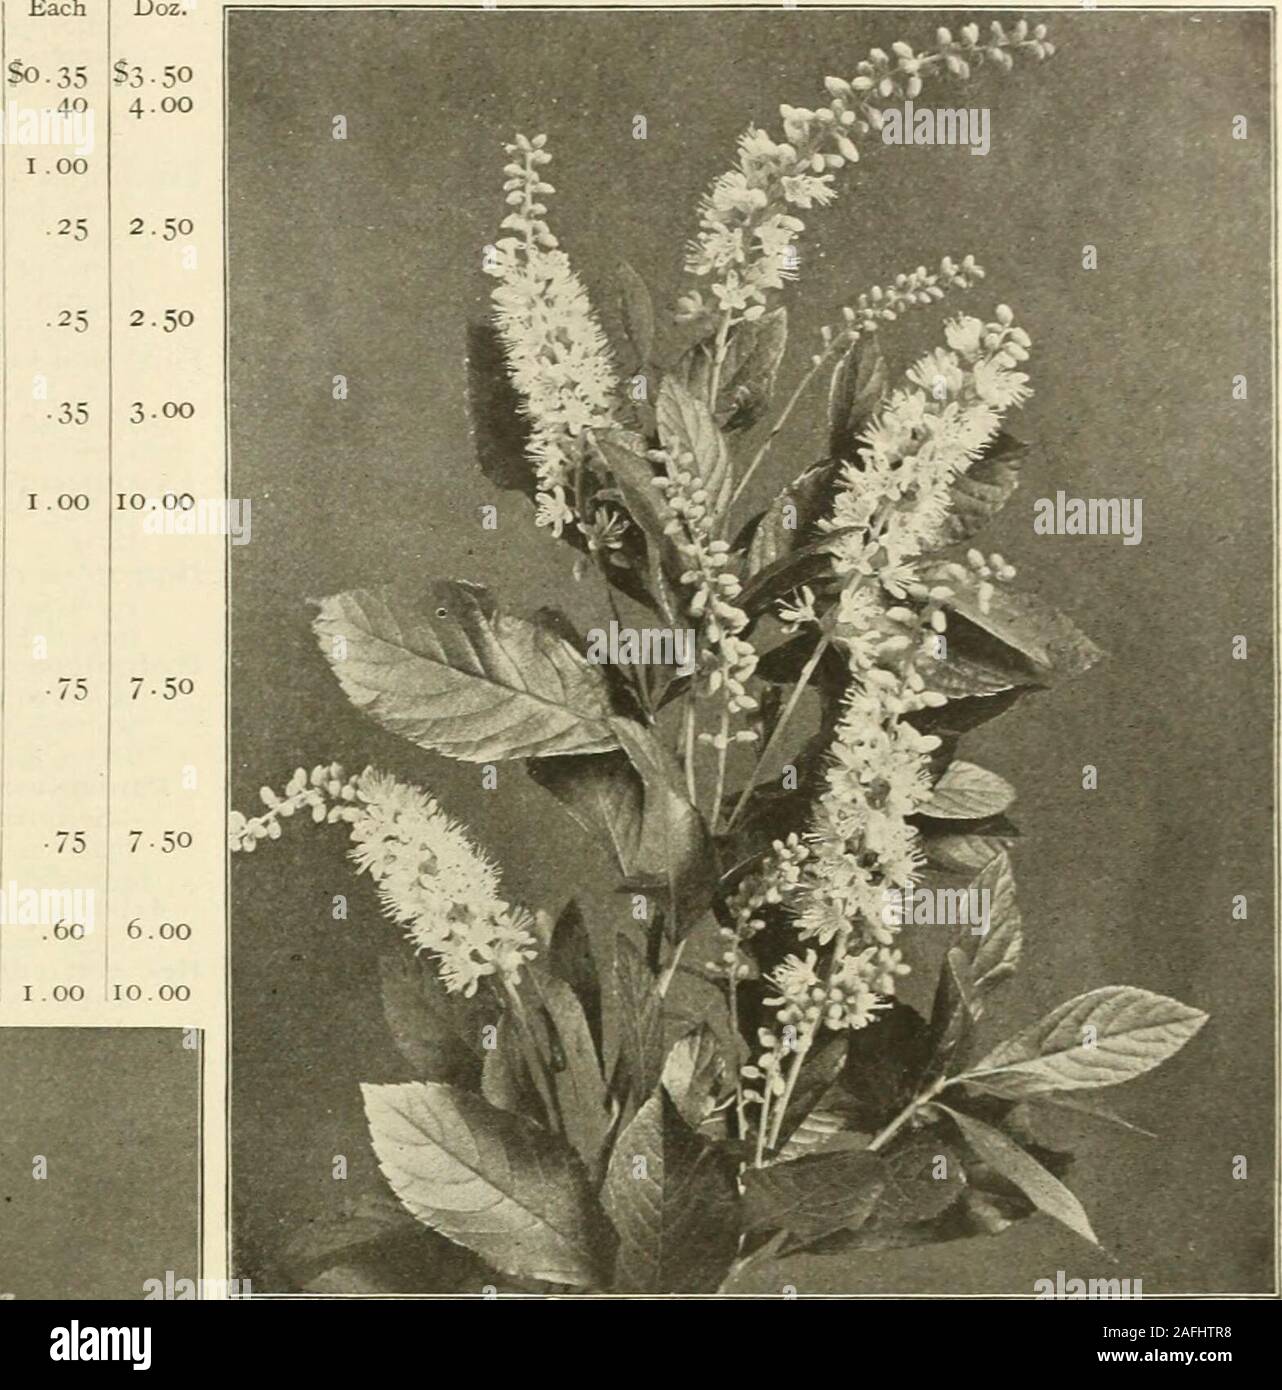 . Farquhar's autumn catalogue : 1913. 35 Comus Stolonifera.—Dordood. Clethra Alnifolia. Baccharis halmifolia. Featherj^ white flowers. Sep- Each tember S.35 Berberis purpurea. Purple-Leaved Barberry. Dark purple foliage Thunbergii. Japanese Barberry. Dwarf, handsome, shining foUage which turns copper--red in autumn; its bright red berries hang throughout the entire winter. Large plants Vulgaris. Common Barberry. June Calycanthus floridus. Spice Btish. Brown flowers; fragrant; June to August Caragana arborescens. Siberian Pea. An interesting shrub, flowers yellow, pea-shaped; May ....Chionanth Stock Photo